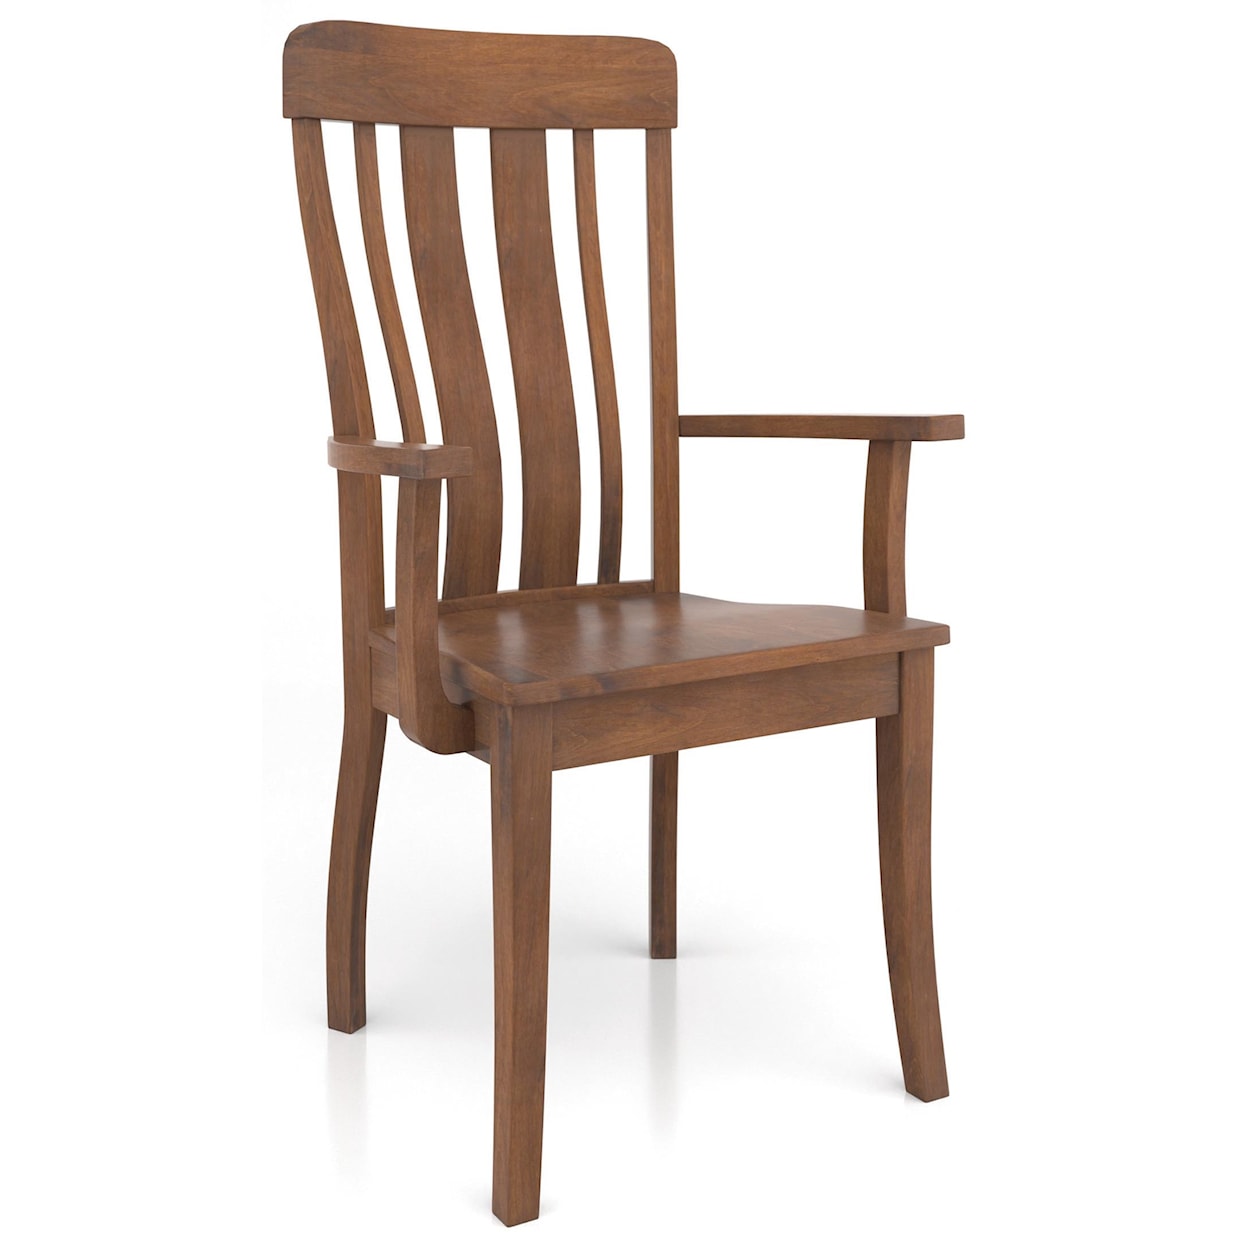 Wengerd Wood Products Krilow Arm Chair